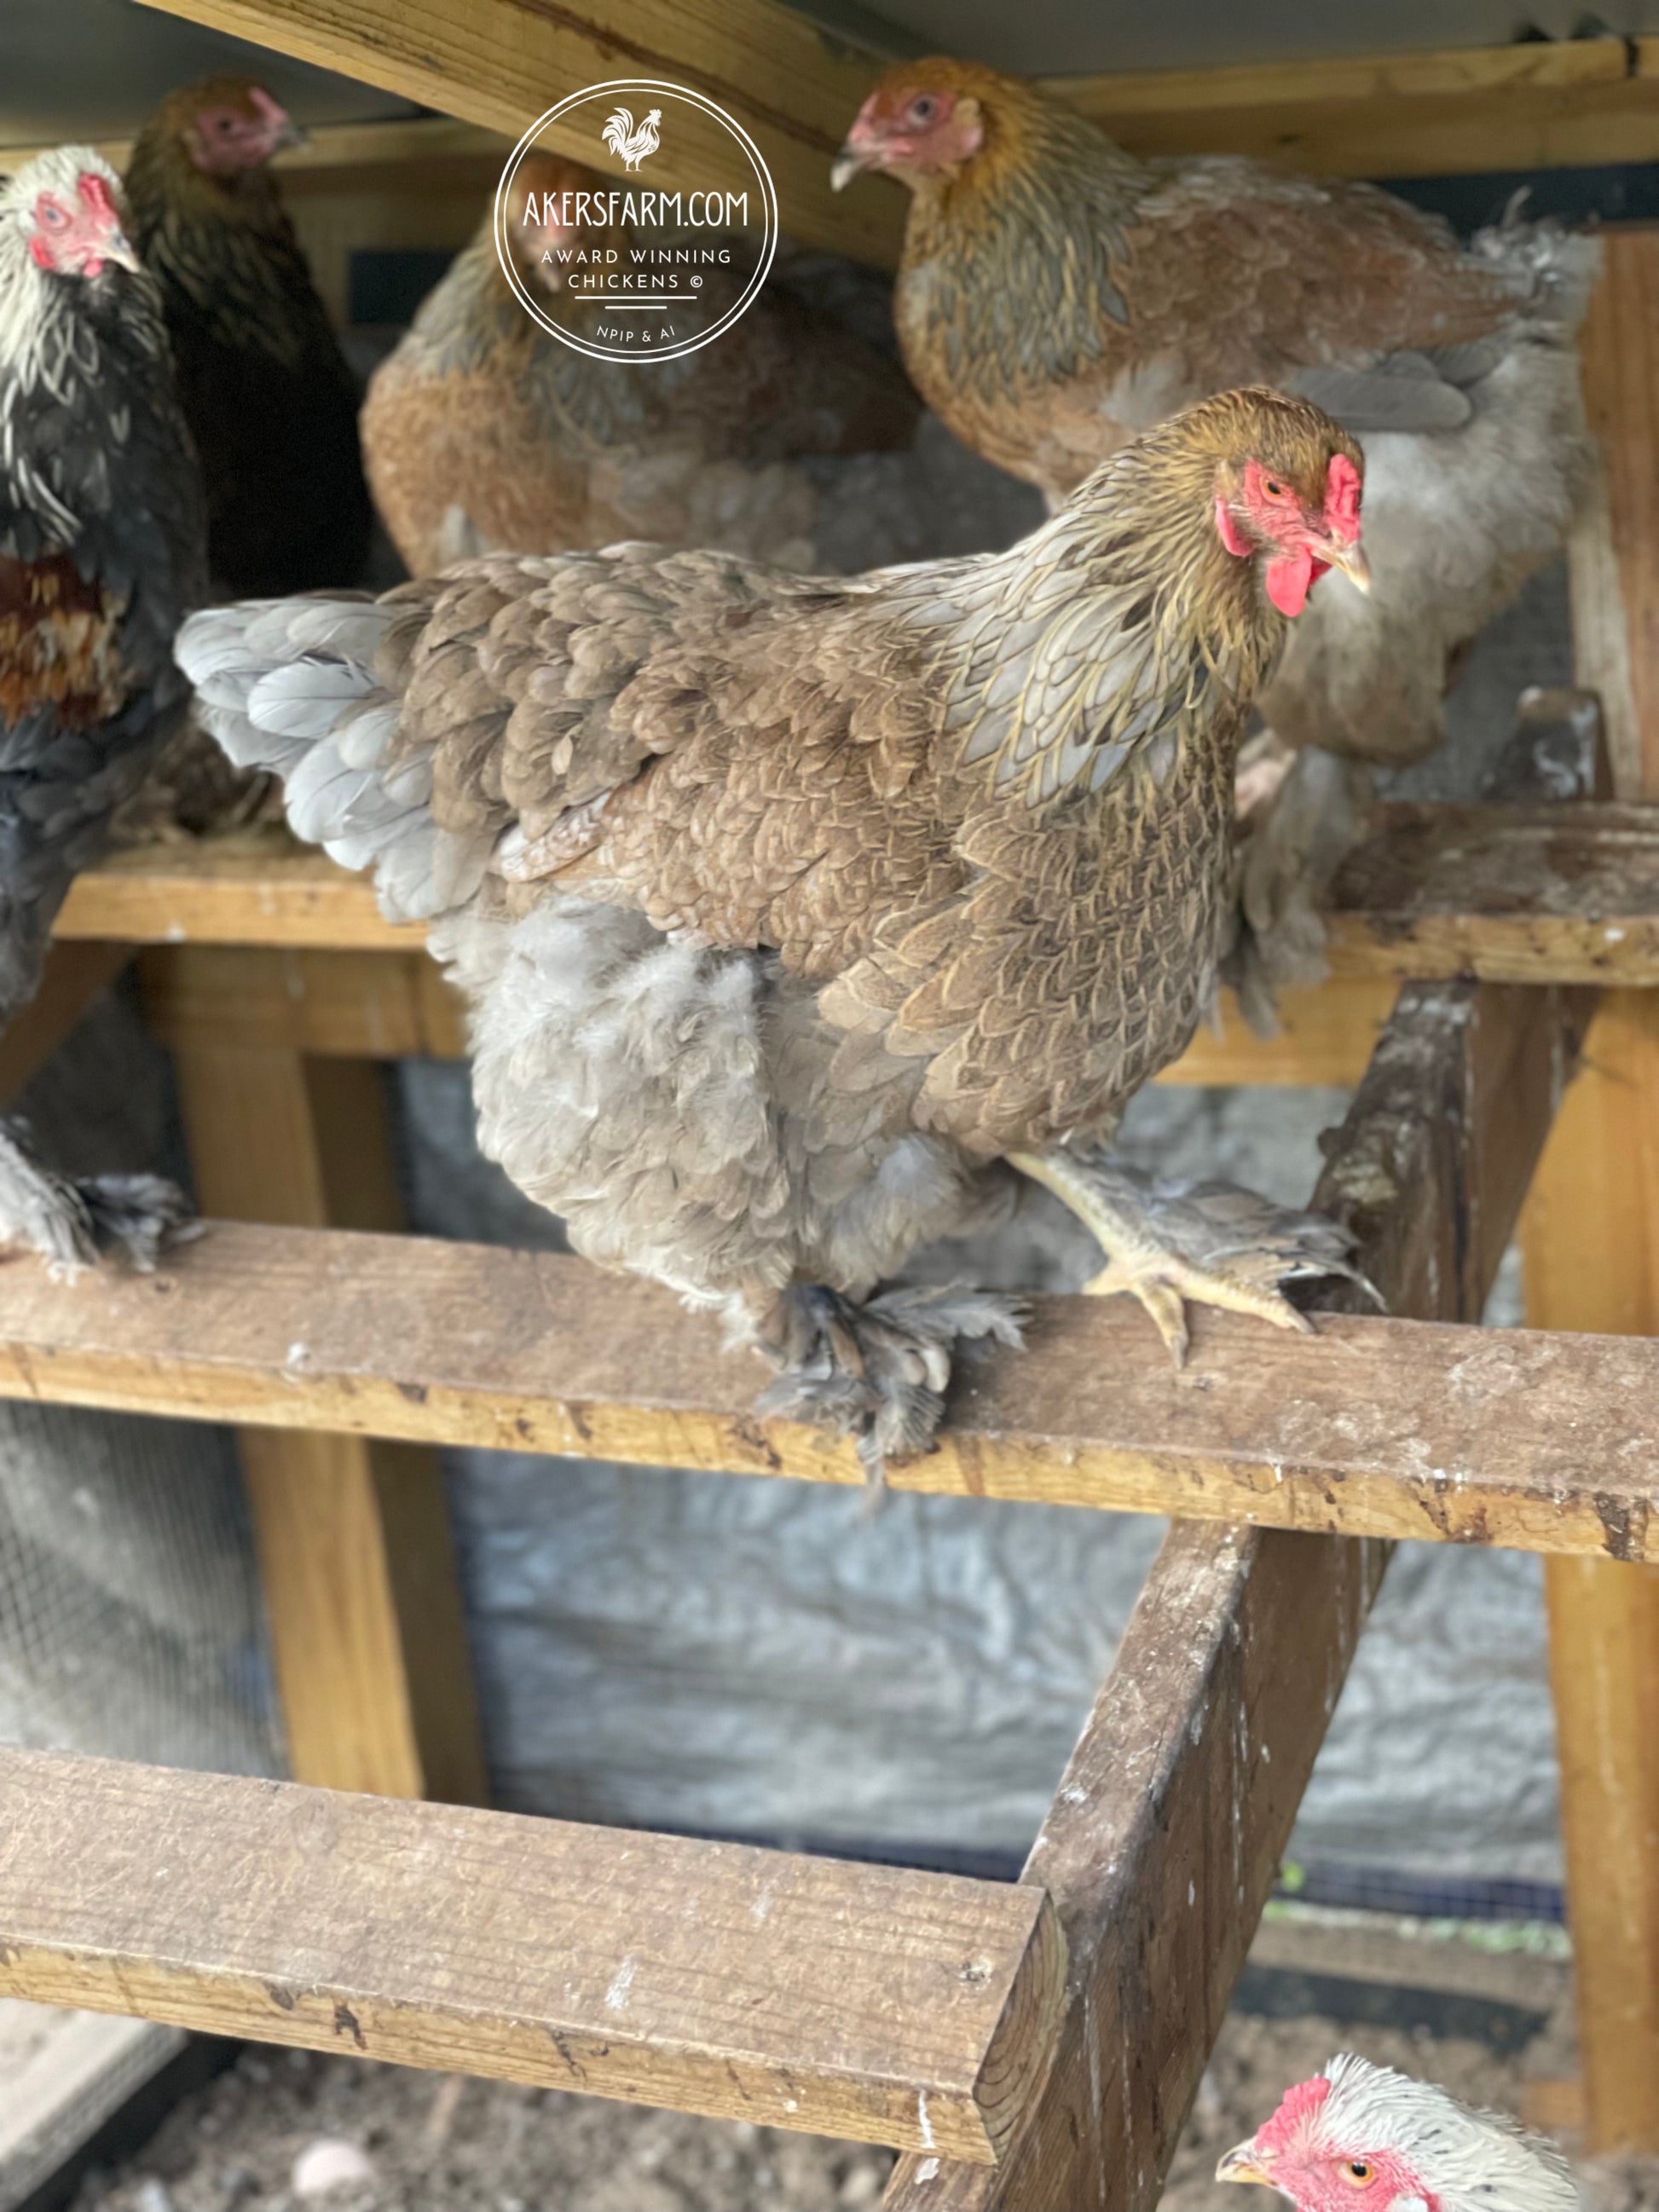 Blue Partridge Brahma hatching eggs and chicks, Birds for Rehoming, Edmonton